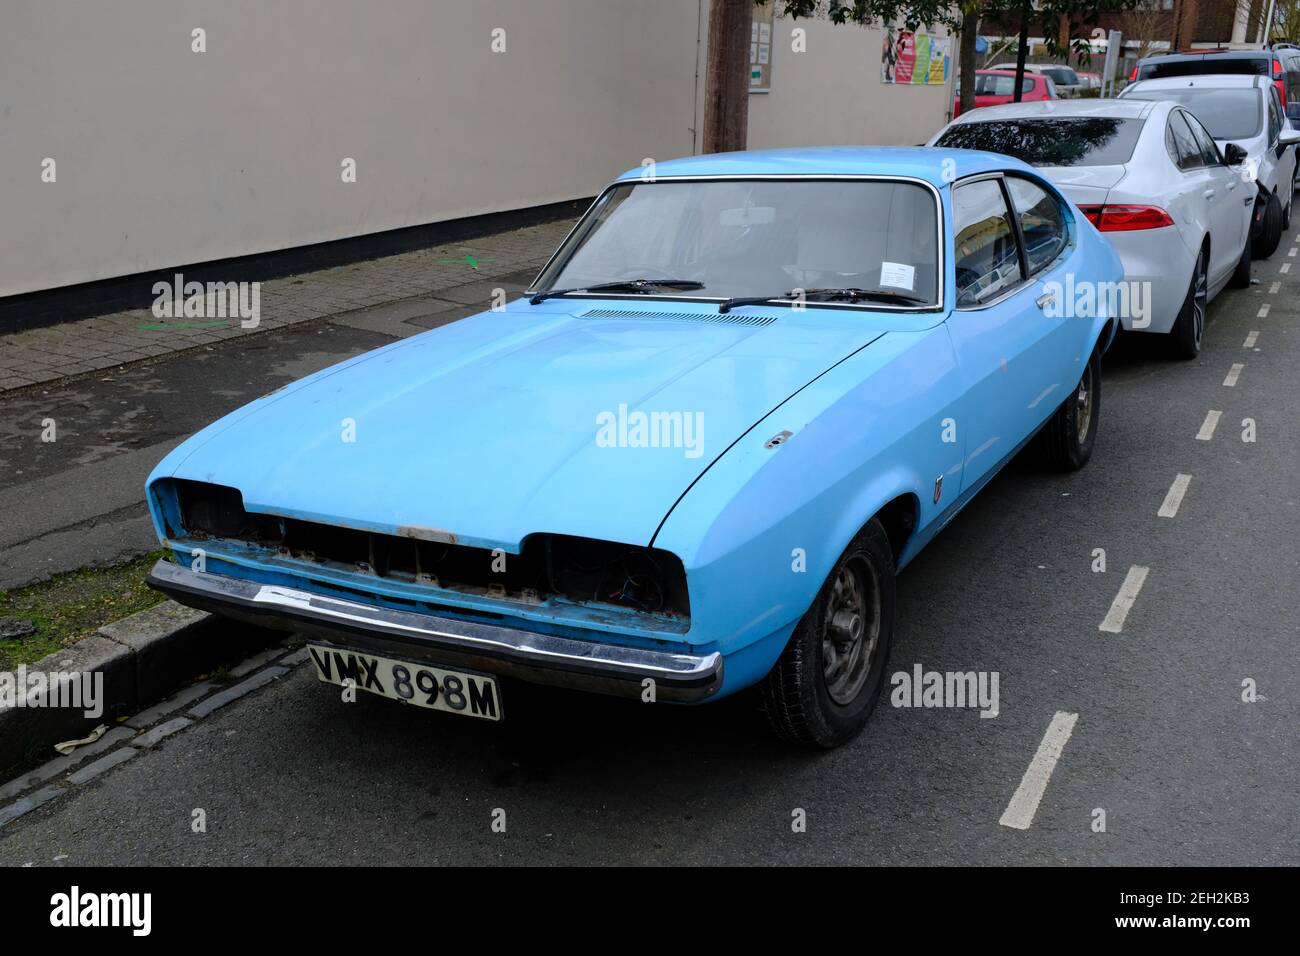 FOREST GATE, LONDON - 19TH FEBRUARY 2021: A light blue Ford Capri classic car parked up on the street. Stock Photo